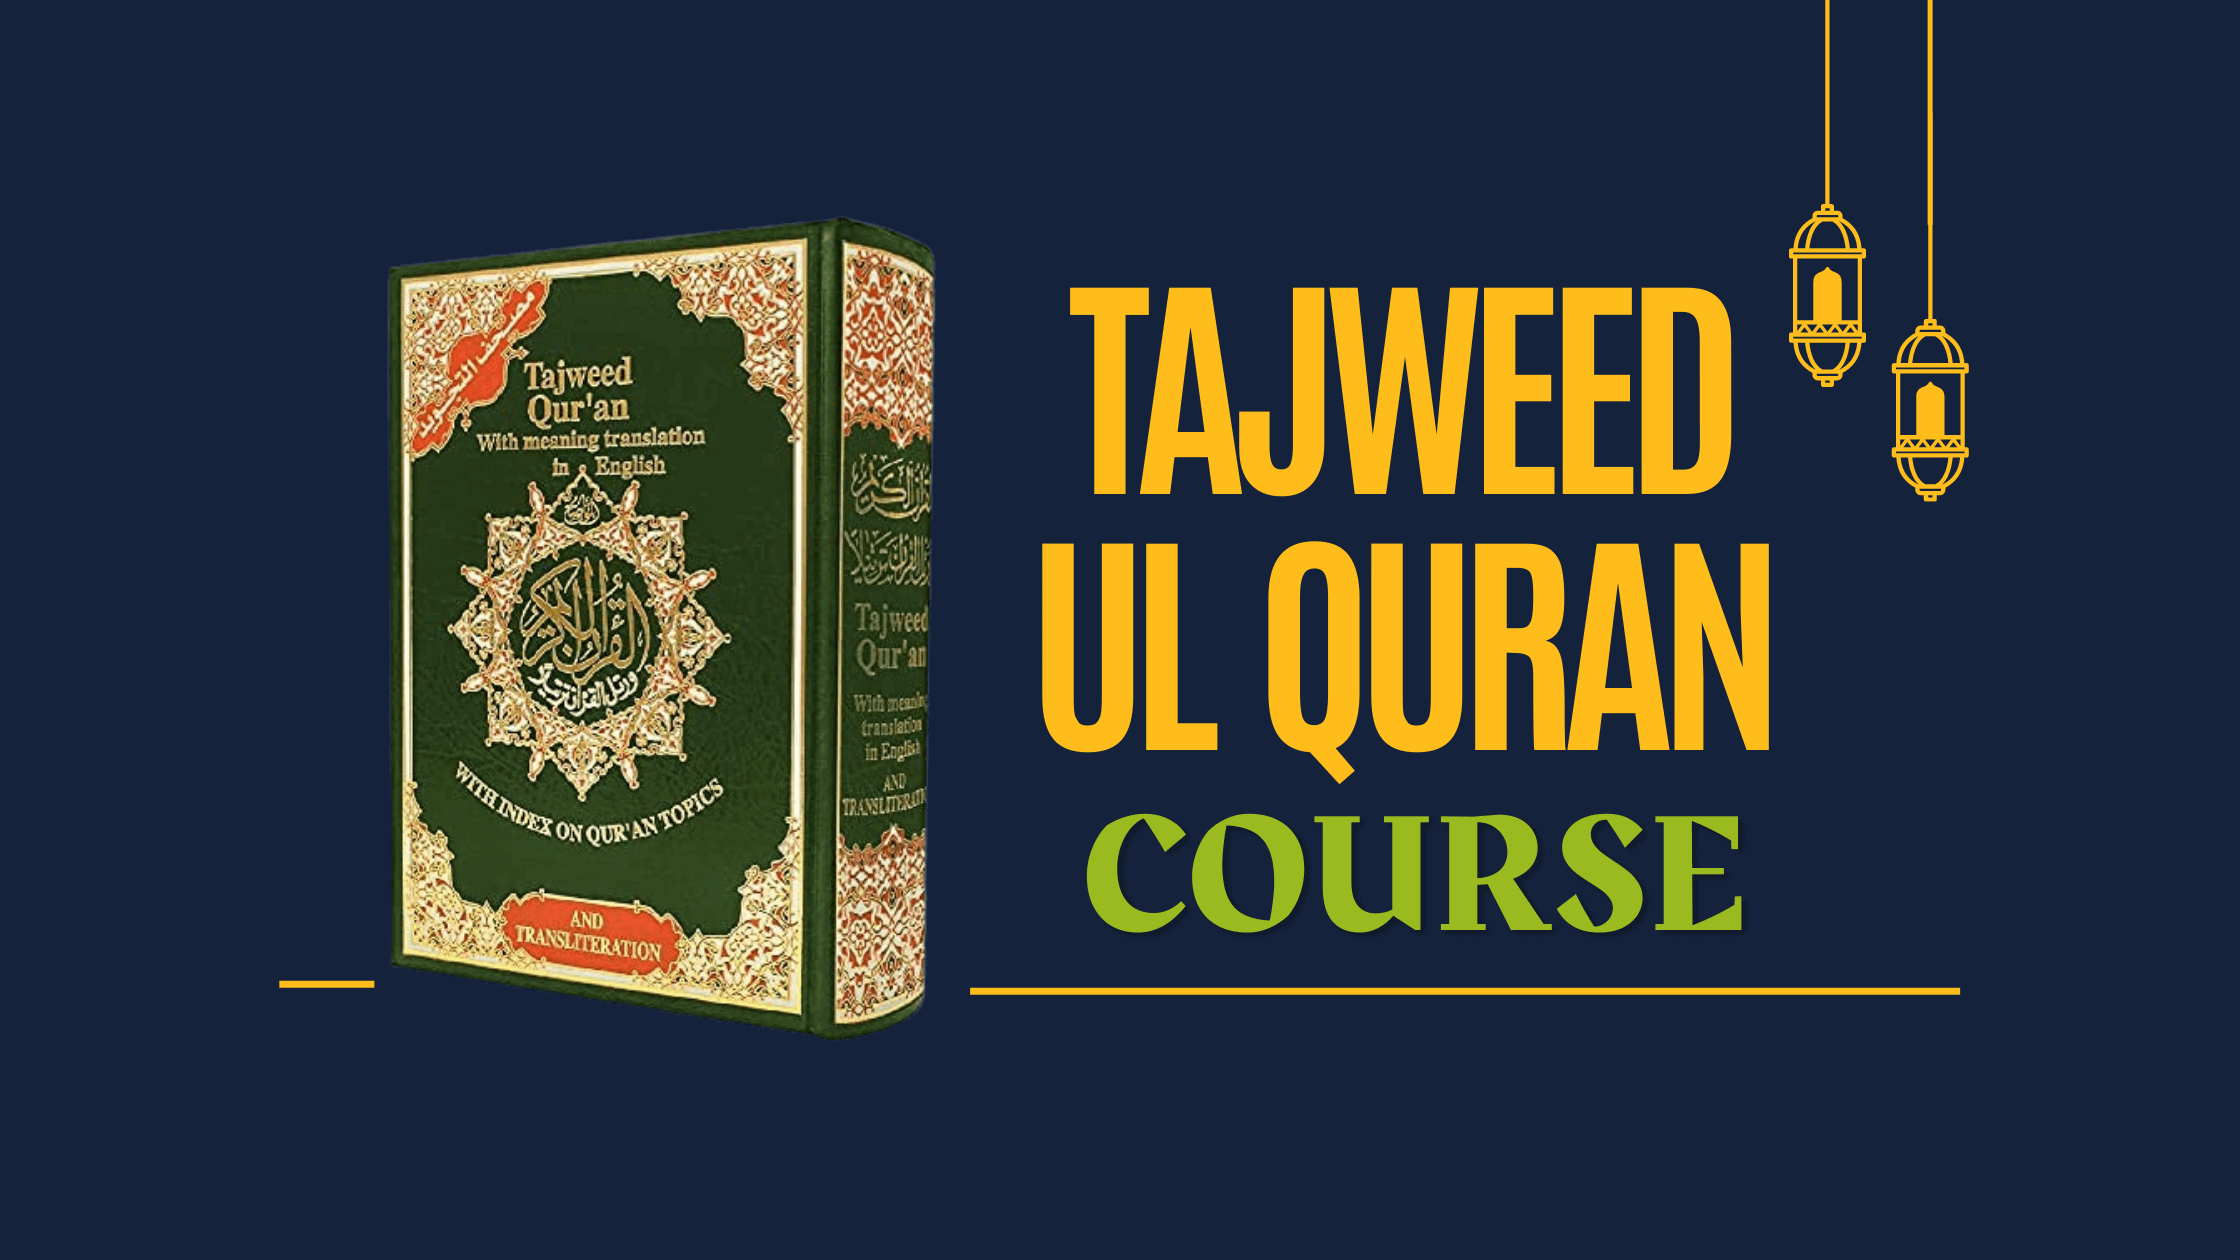 Best online tajweed course in usa for kids, begineers, and adults